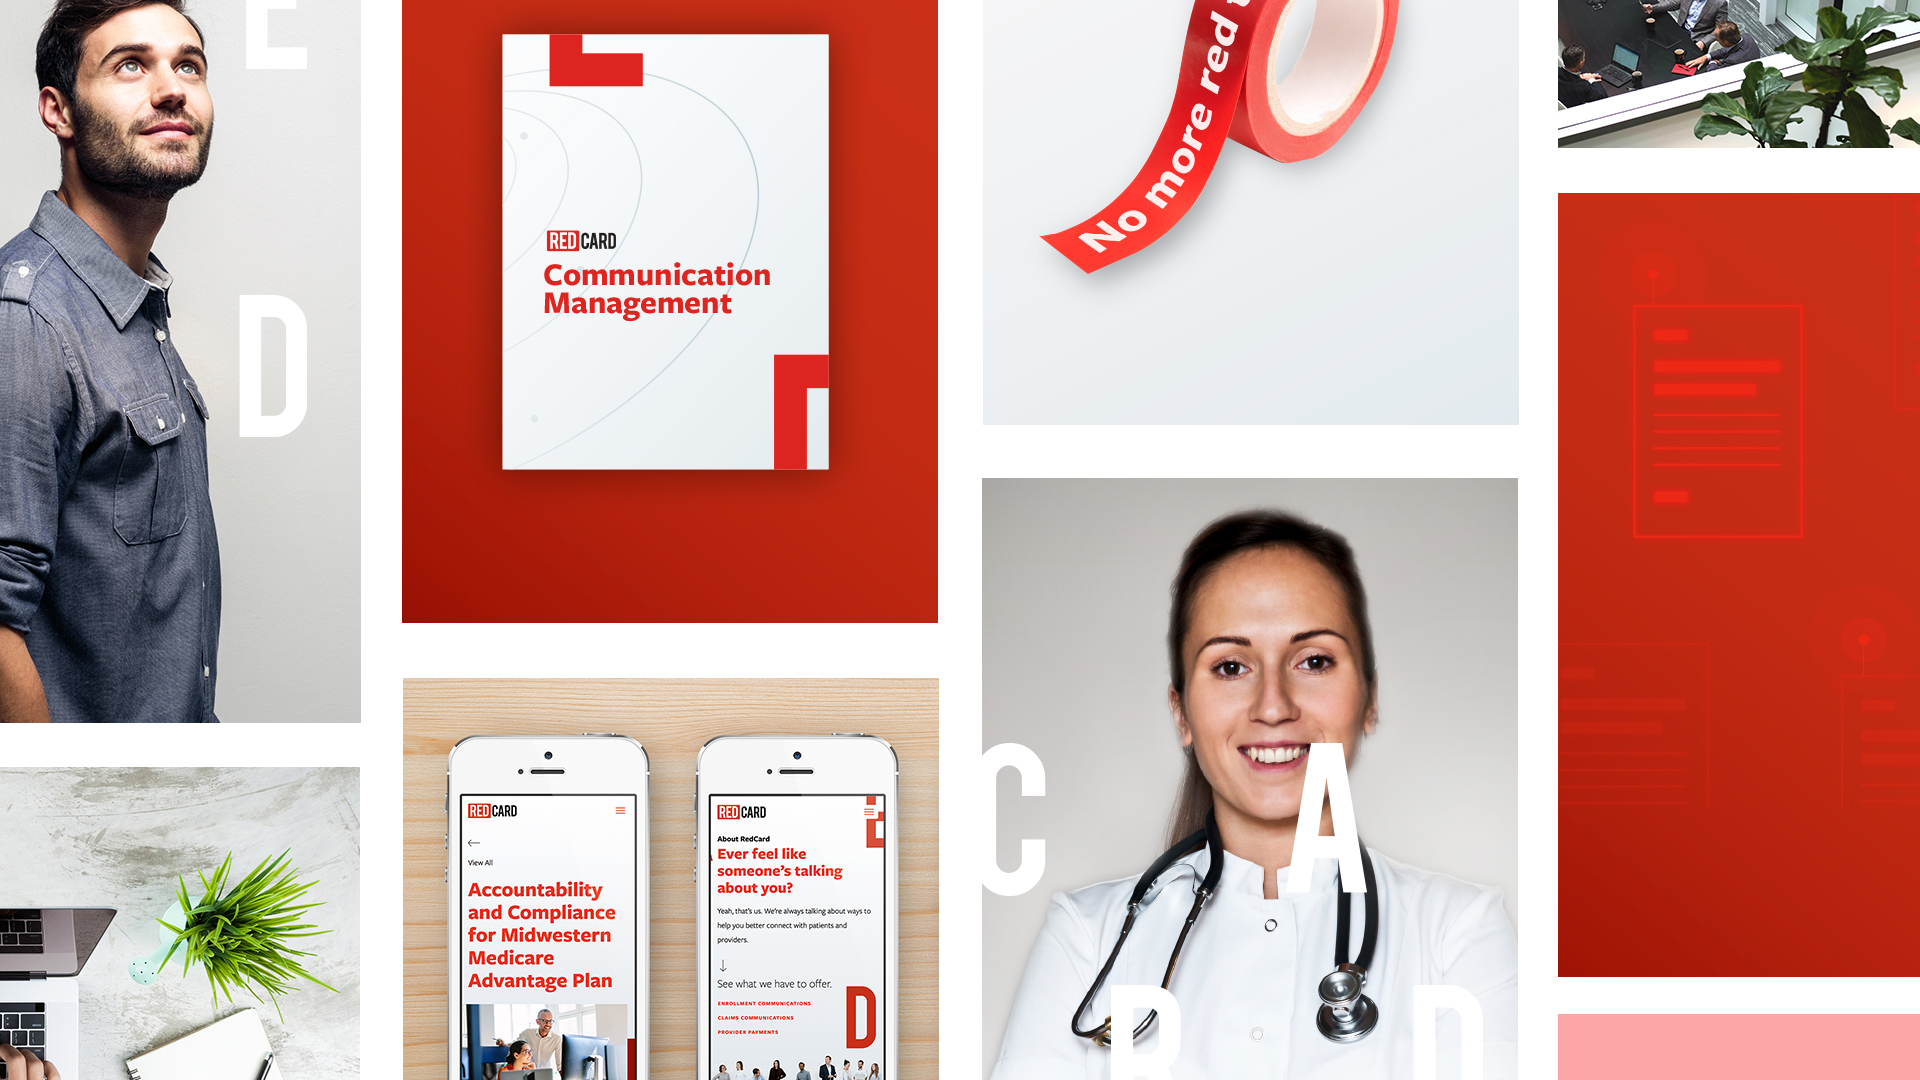 Collage of brand elements created by design team lead Jessica for healthcare marketing company RedCard